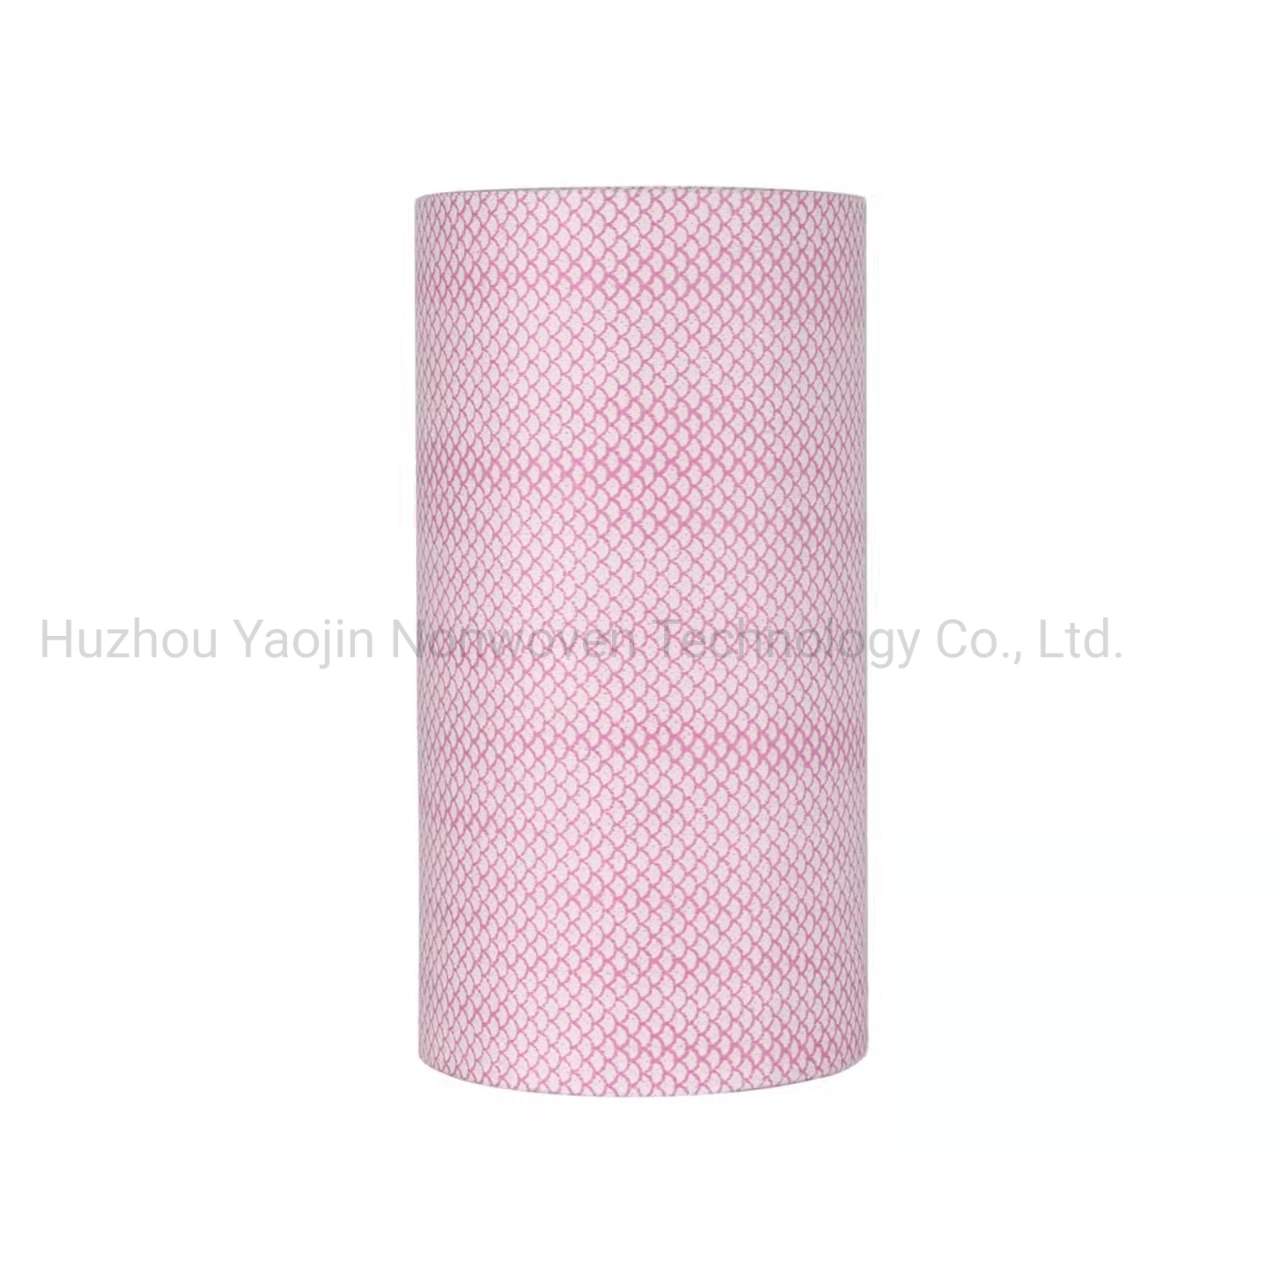 China Manufacturer Wholesale Heavy Duty Industry or Home and Kitchen Dry Wipes